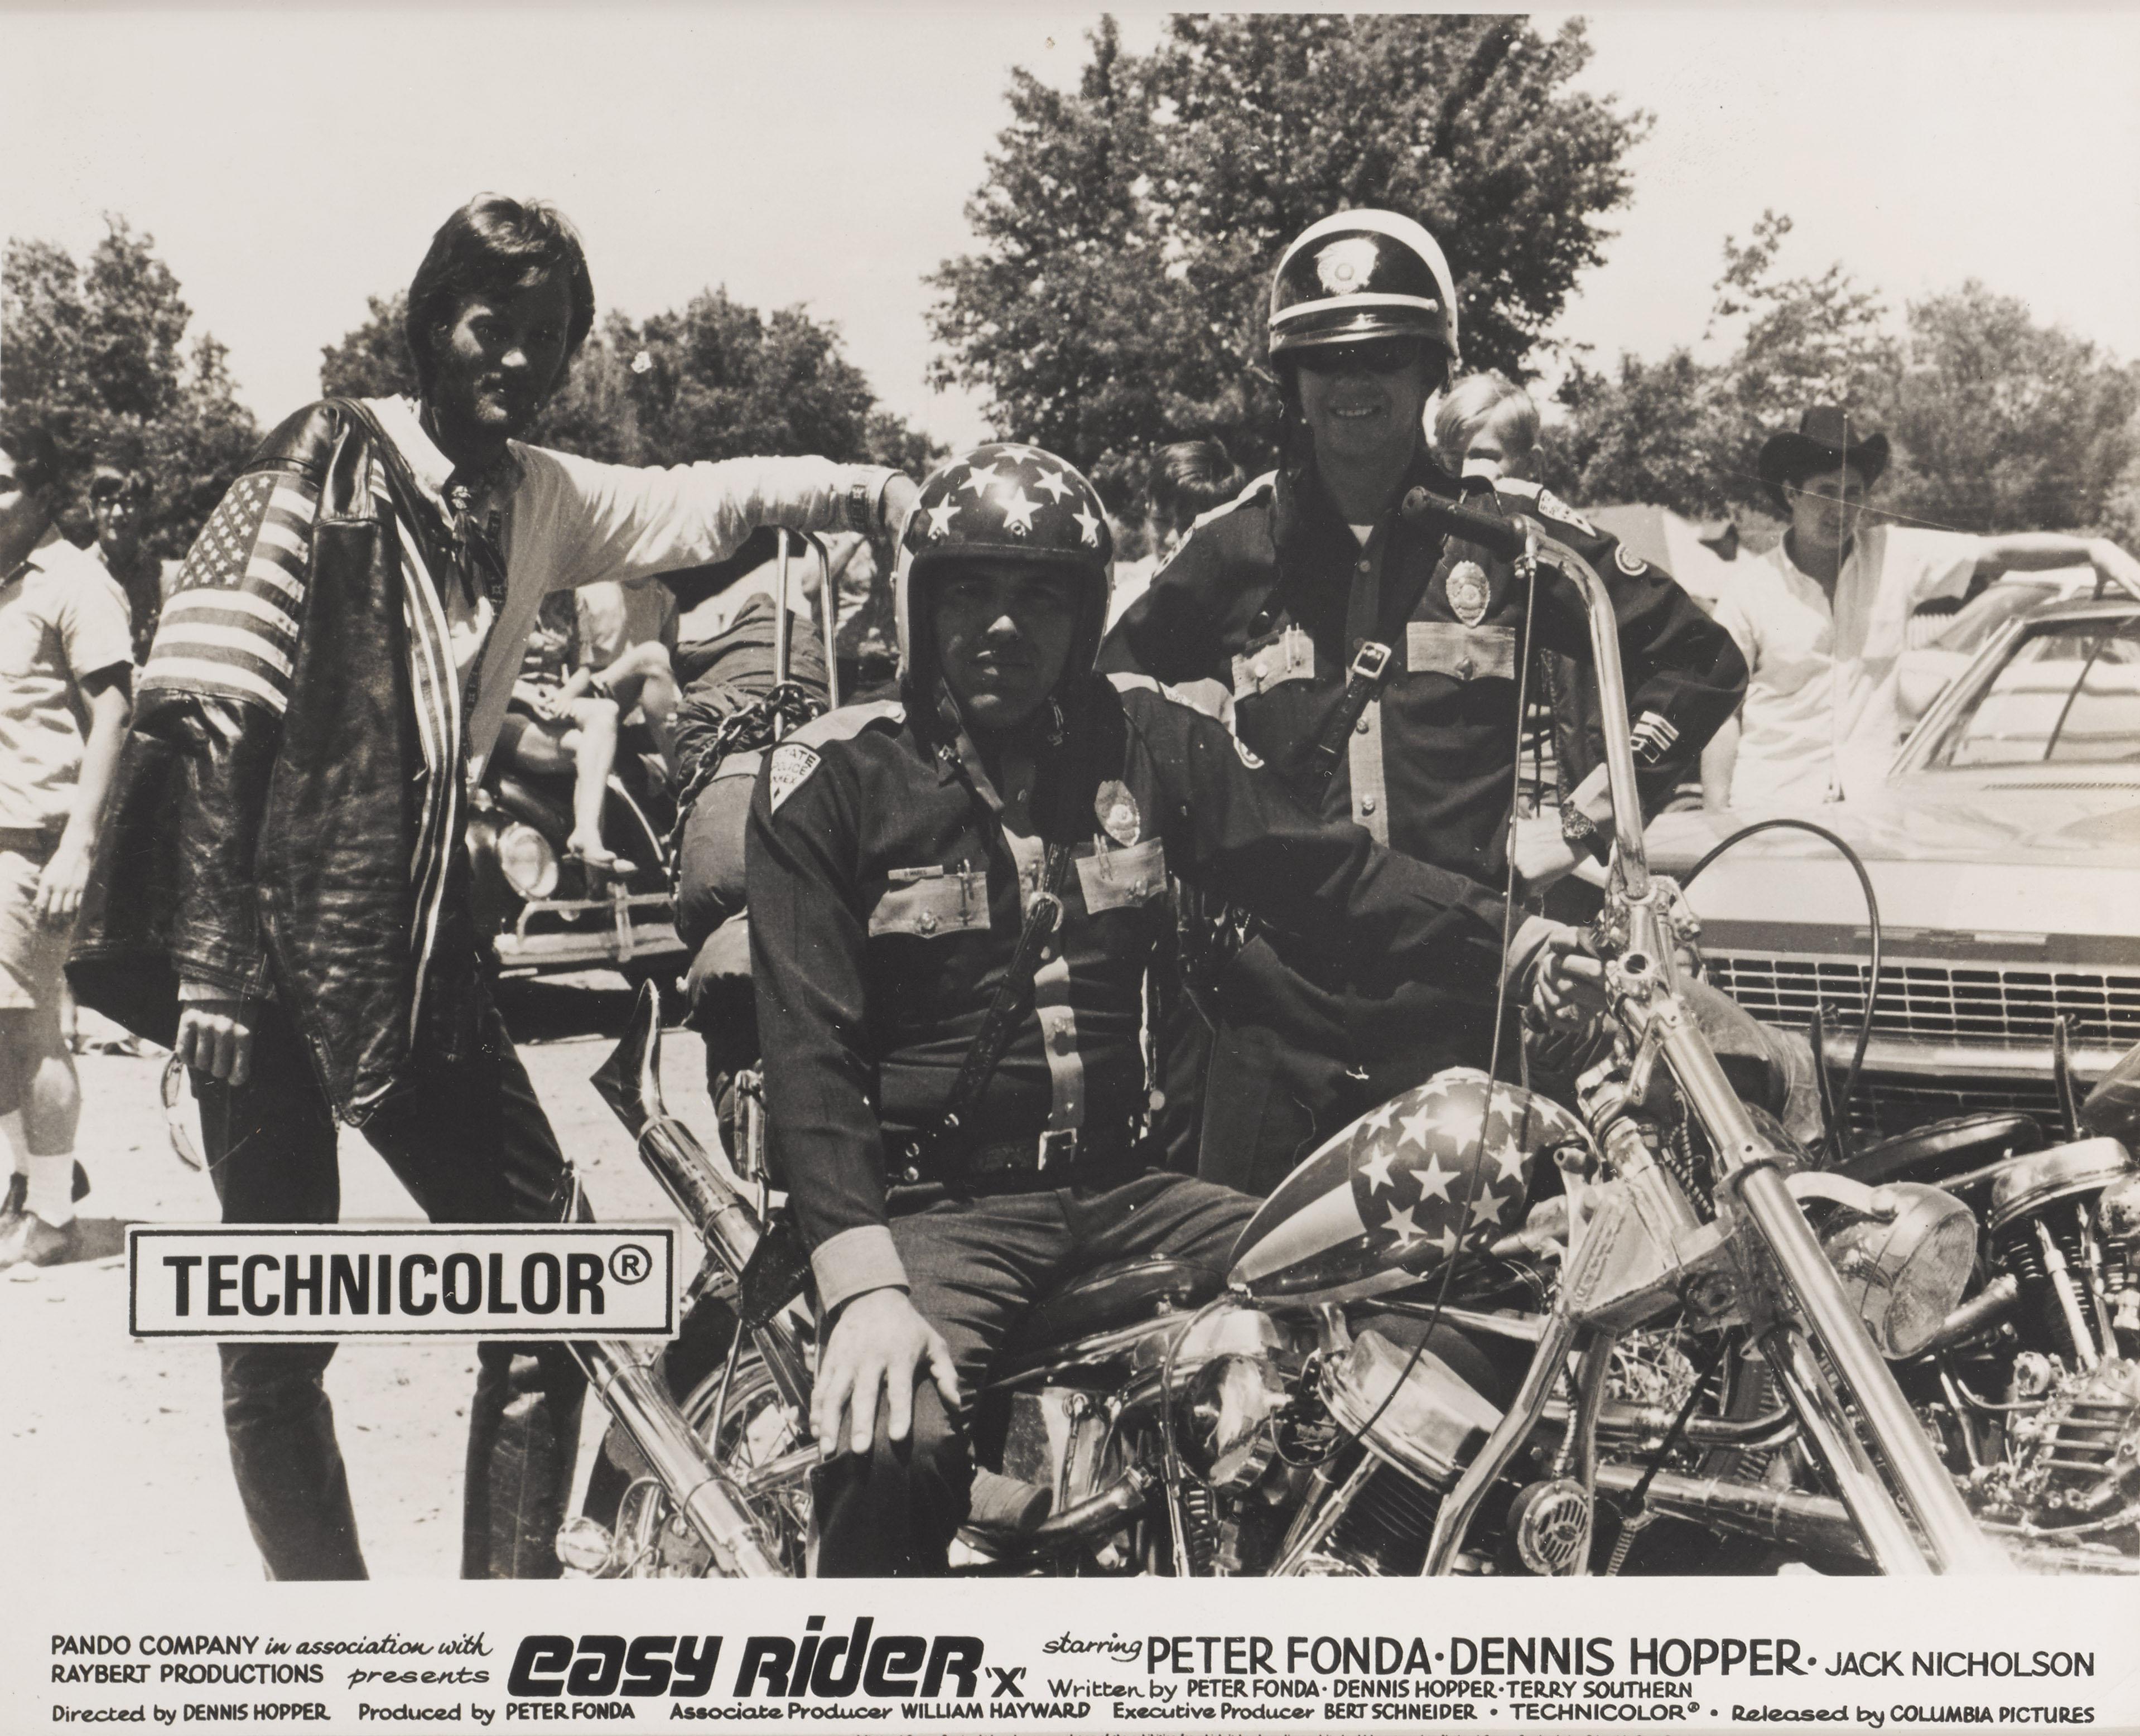 Original candid photographic production still for the 1969 Road Movie Easy Rider.
This film was directed by Dennis Hopper, and starred Peter Fonda, Dennis Hopper and Jack Nicholson.
This candid photographic production still taken on location with